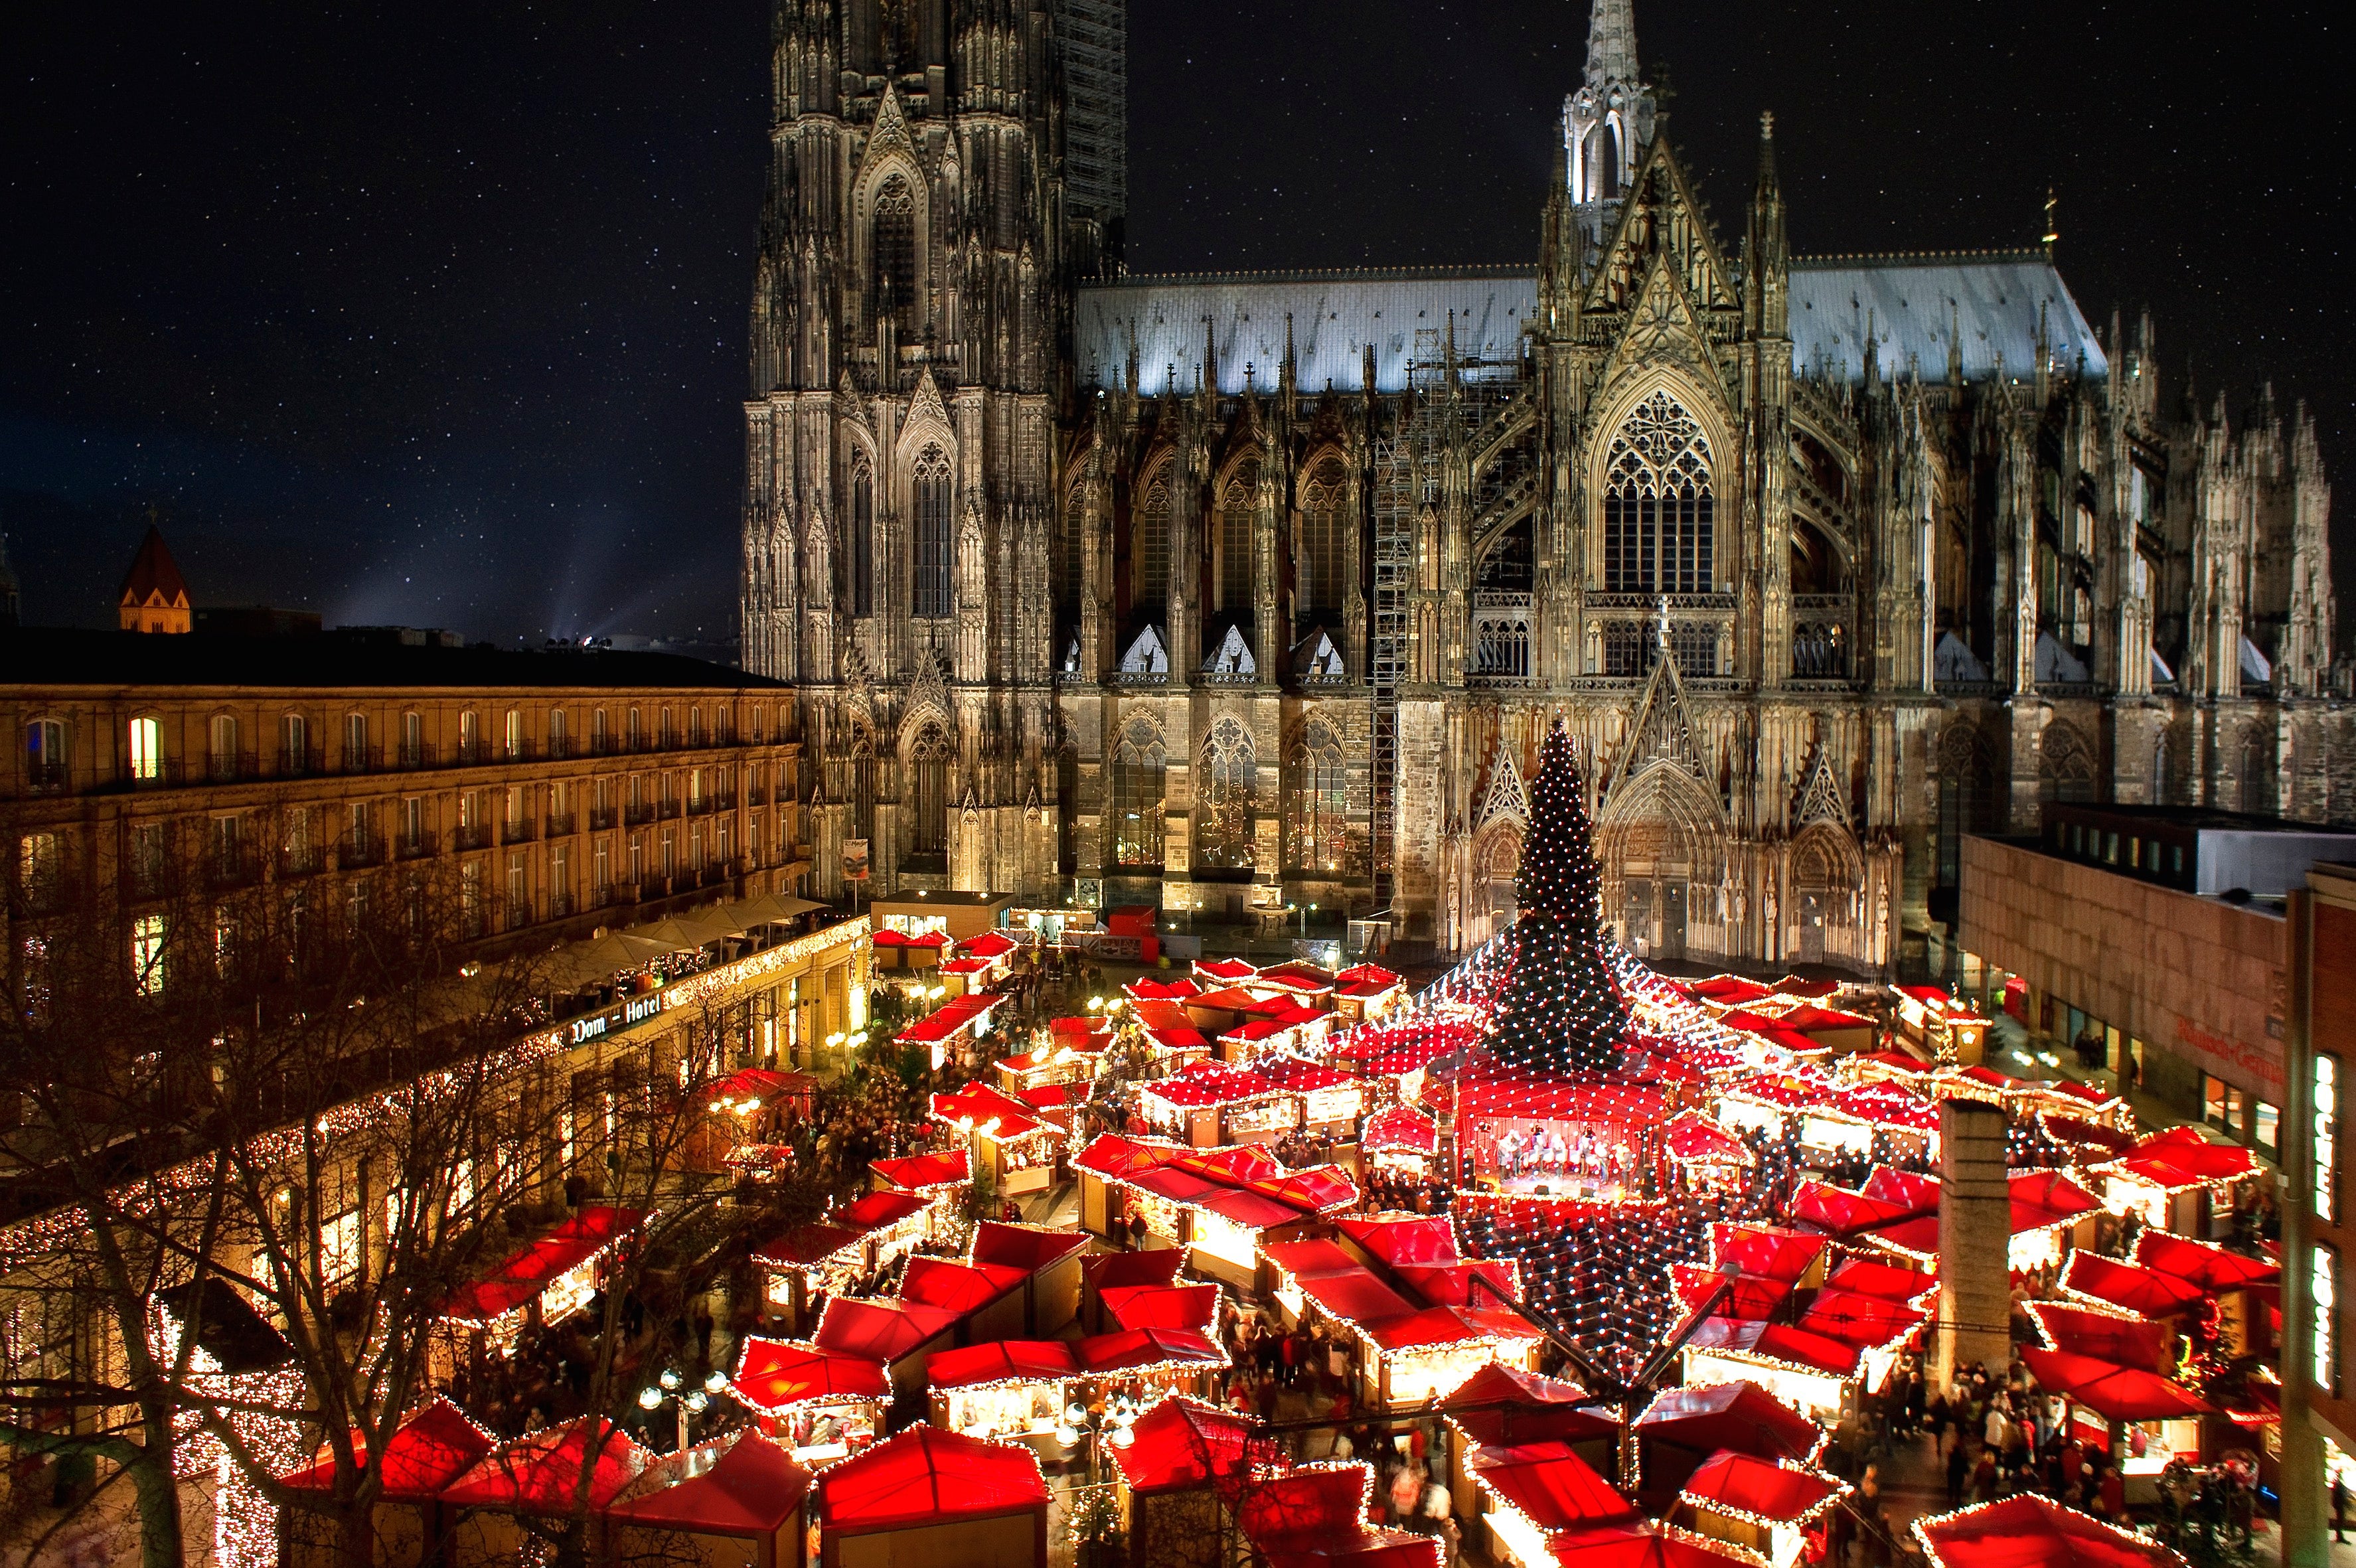 Cologne is one of several cities that is famous for its Christmas Markets